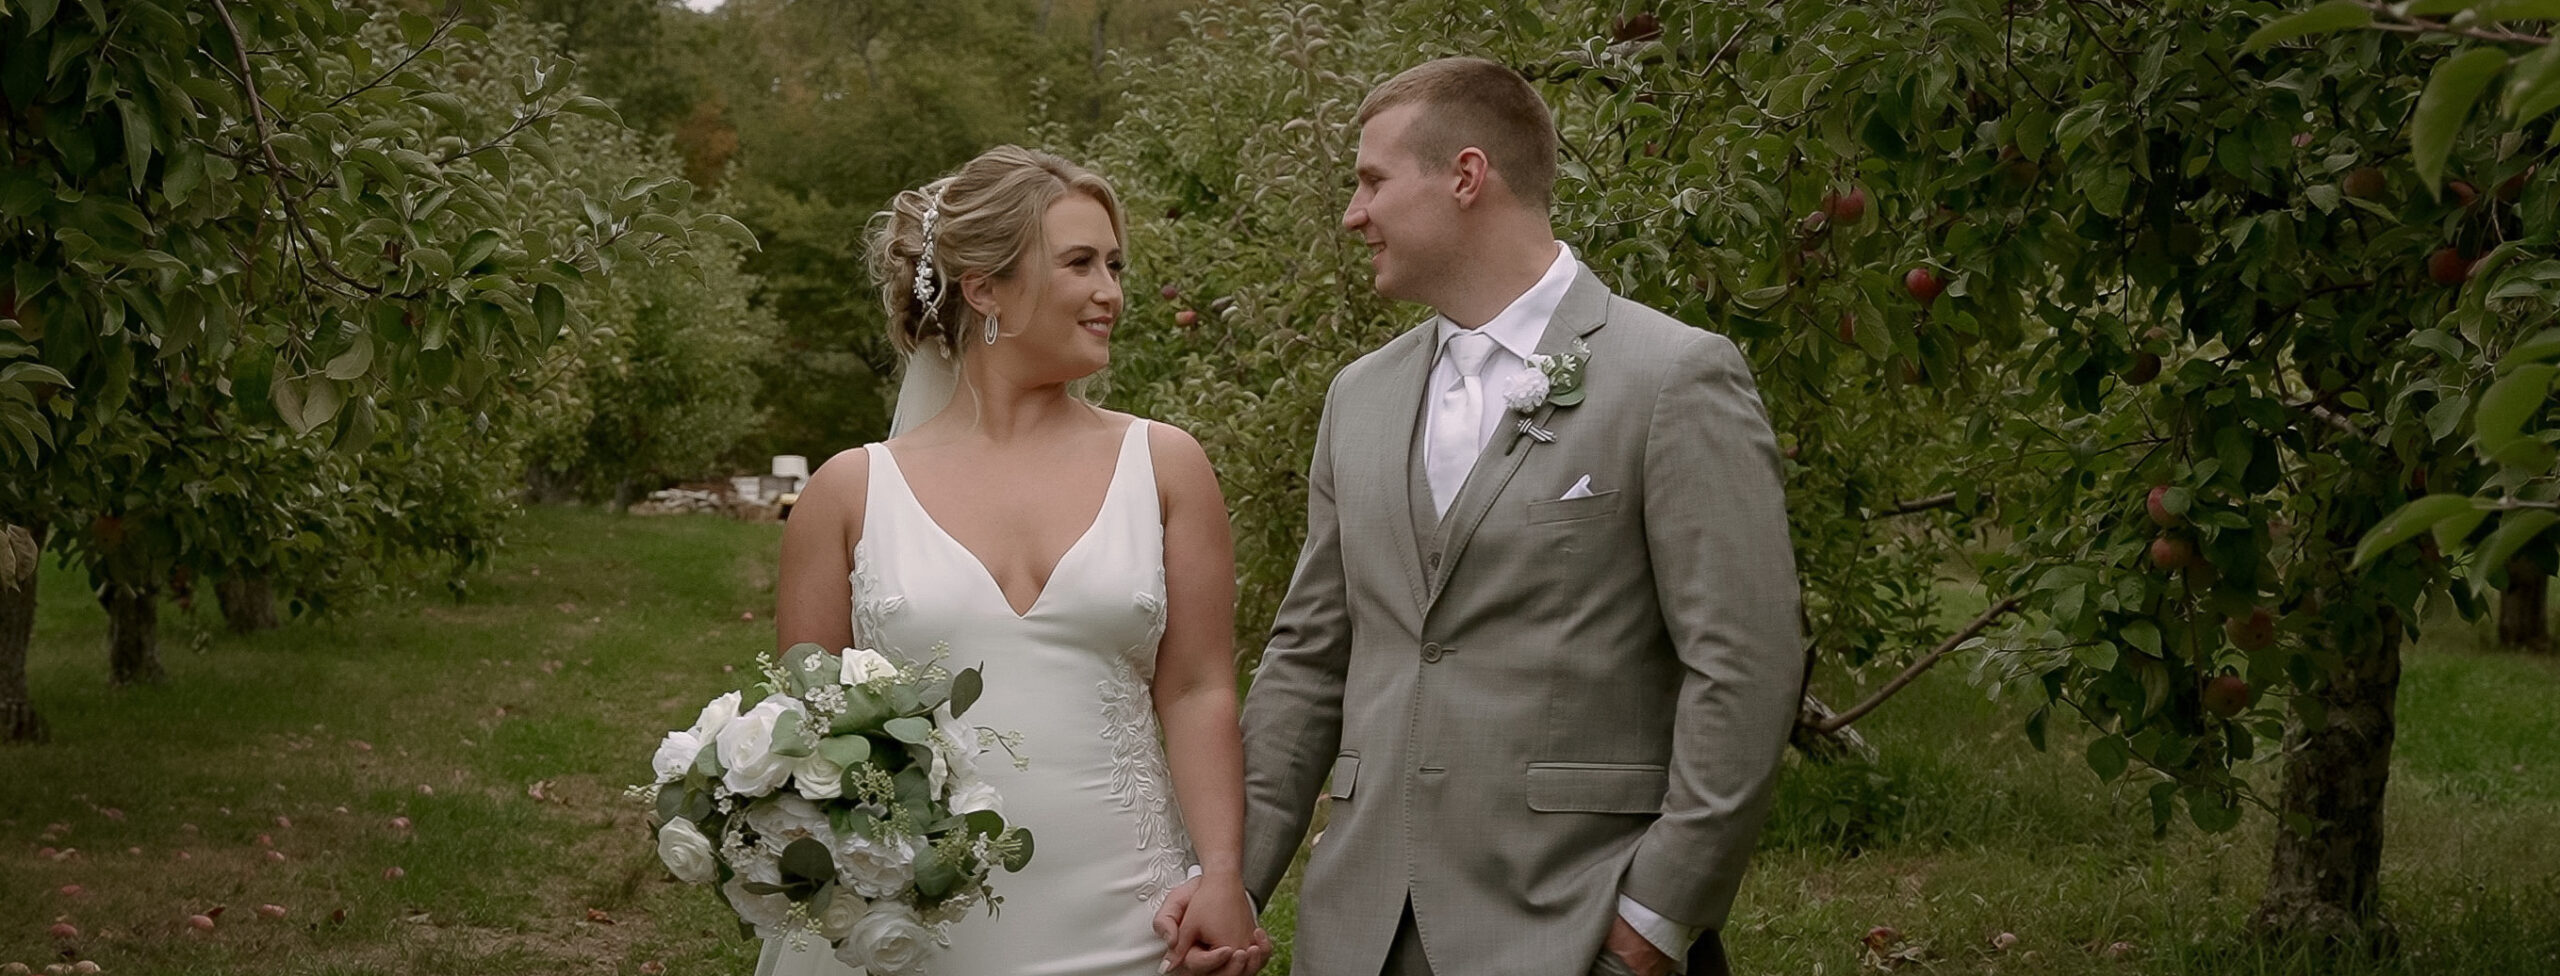 Couple standing side- by- side. holding hands in an apple orchard. Bride is wearing a low cut white dress with lace accents. She has a green and whire bouquet in her right hand and has a cathedral length veil. Groom is wearing a grey suit with a white tie and is standing with his left hand in his pocket